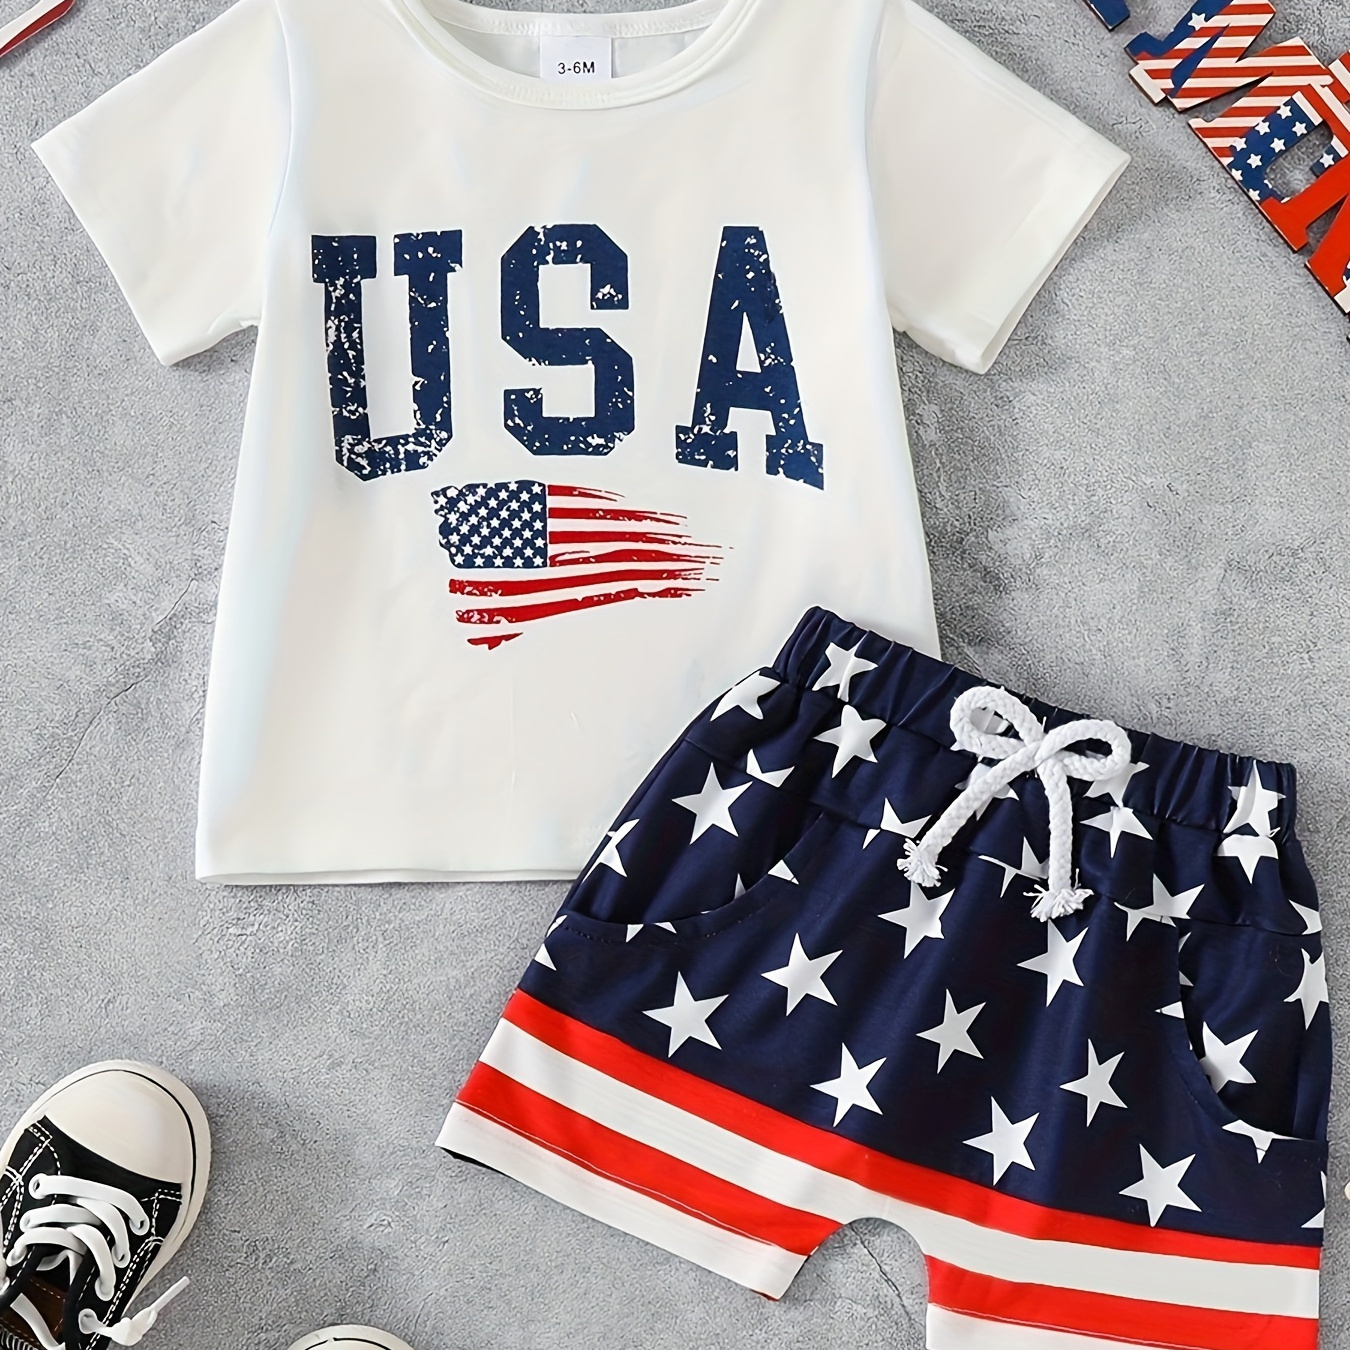 

Baby's Usa Print 2pcs Summer Casual Outfit, T-shirt & Pentagram Full Print Shorts Set, Toddler & Infant Boy's Clothes For Independence Day